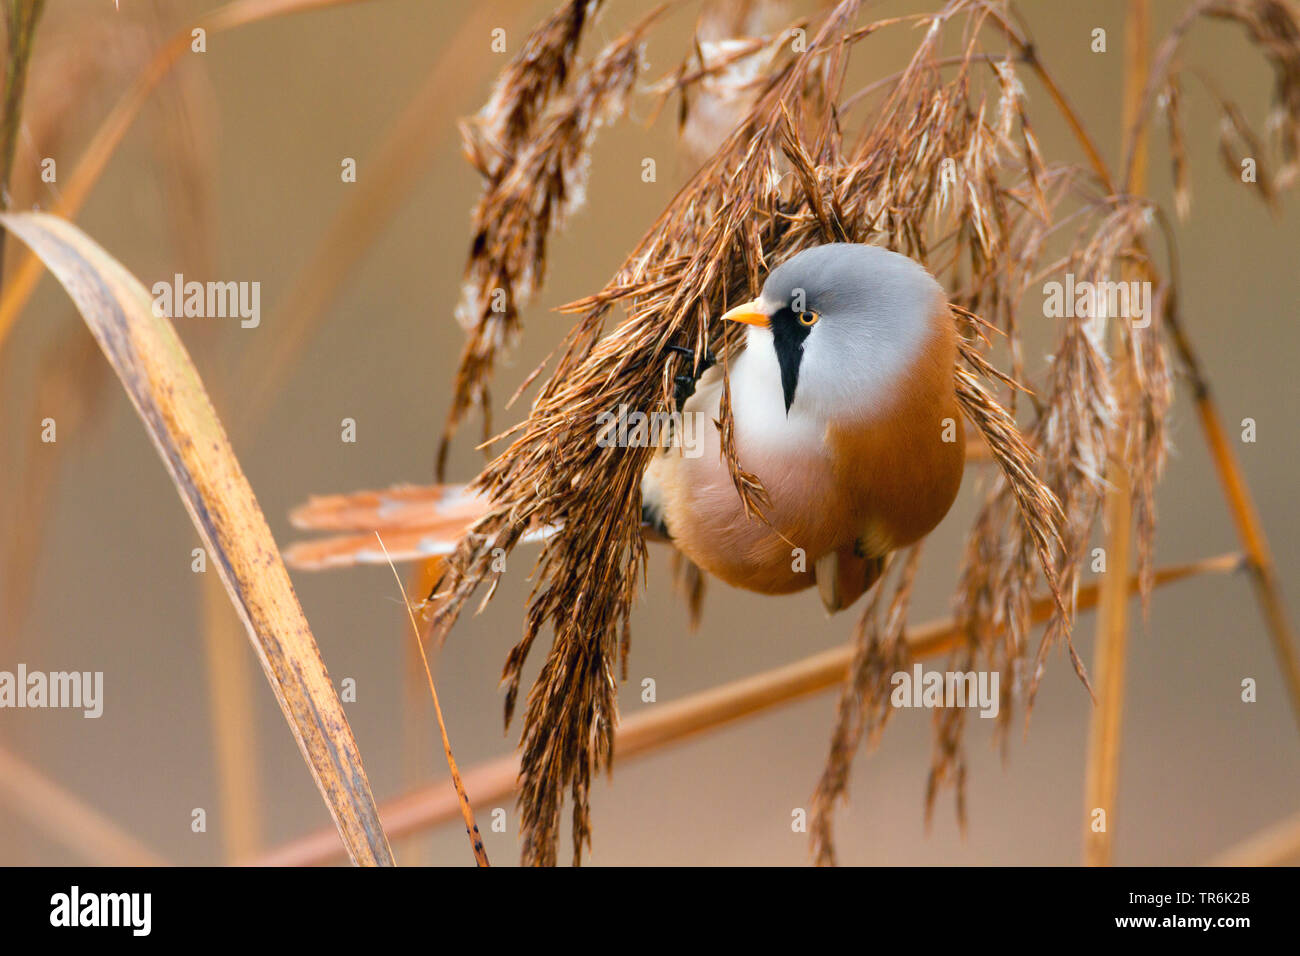 Bearded reedling, Babblers Bearded Tit (Panurus biarmicus), sitting at reed, Germany Stock Photo